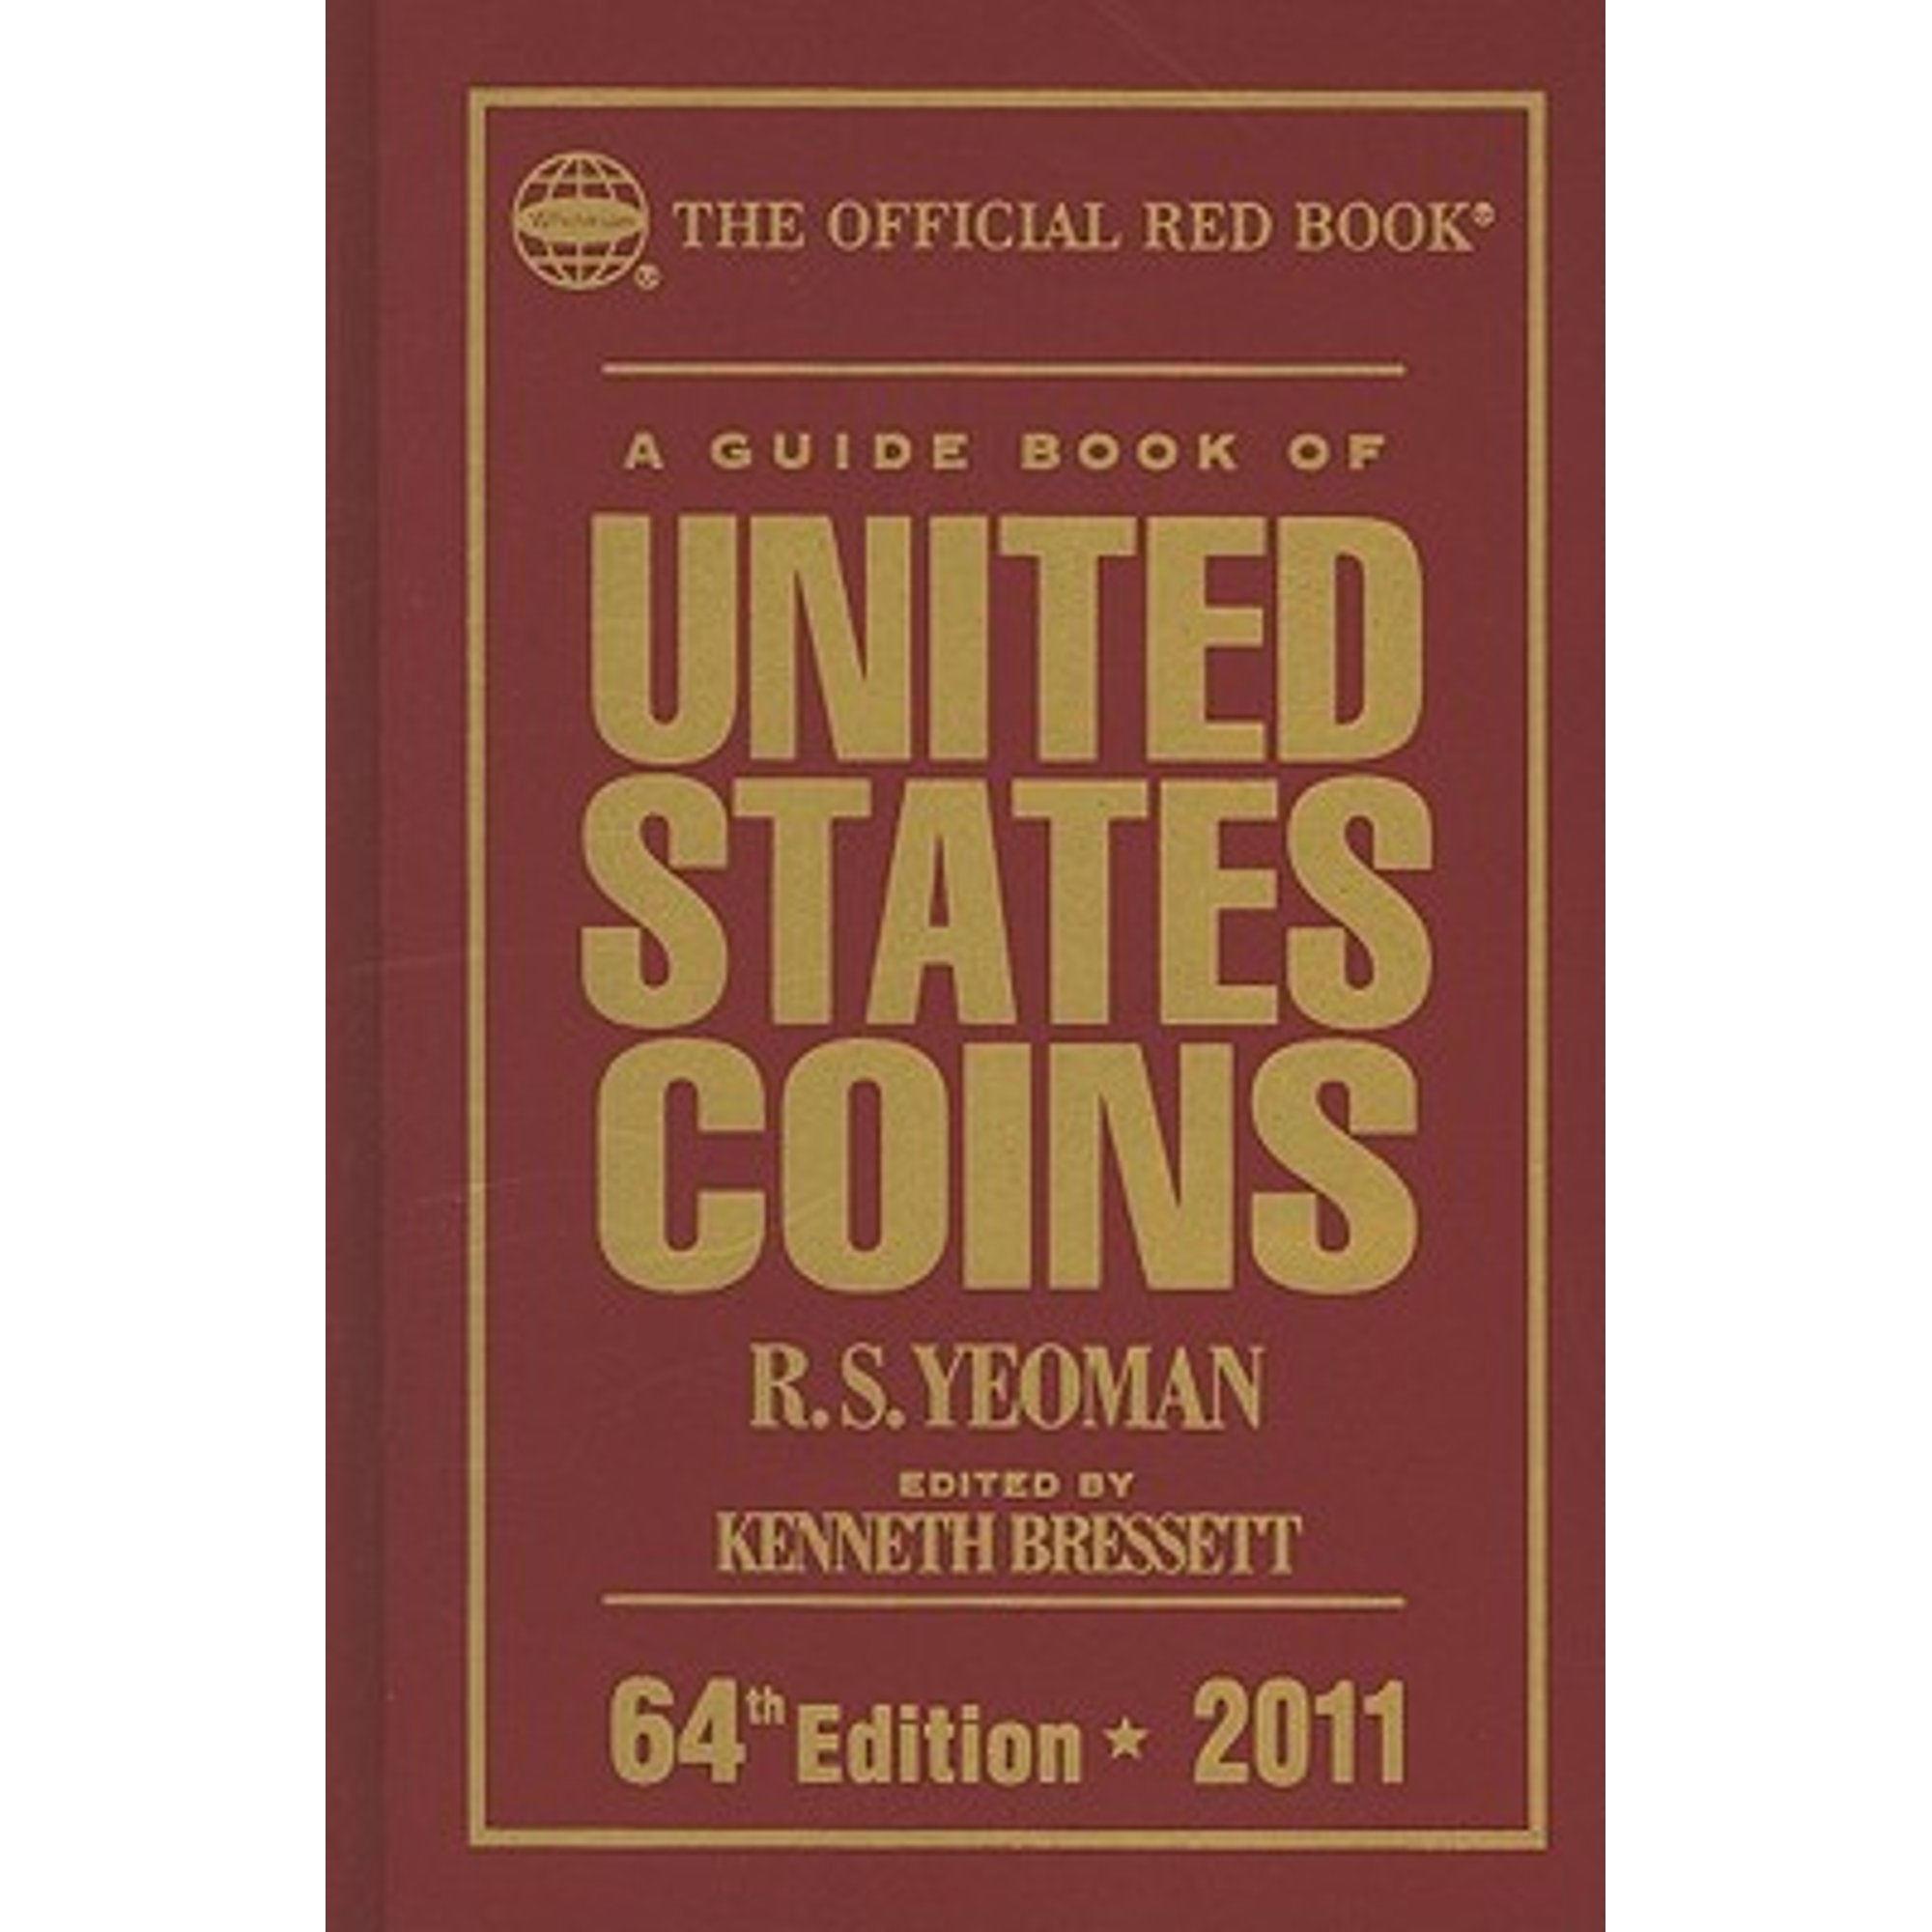 Official Red Book: A Guide Book of United States Coins (Cloth): A Guide Book of United States Coins : The Official Red Book (Edition 64) (Hardcover) - image 1 of 1